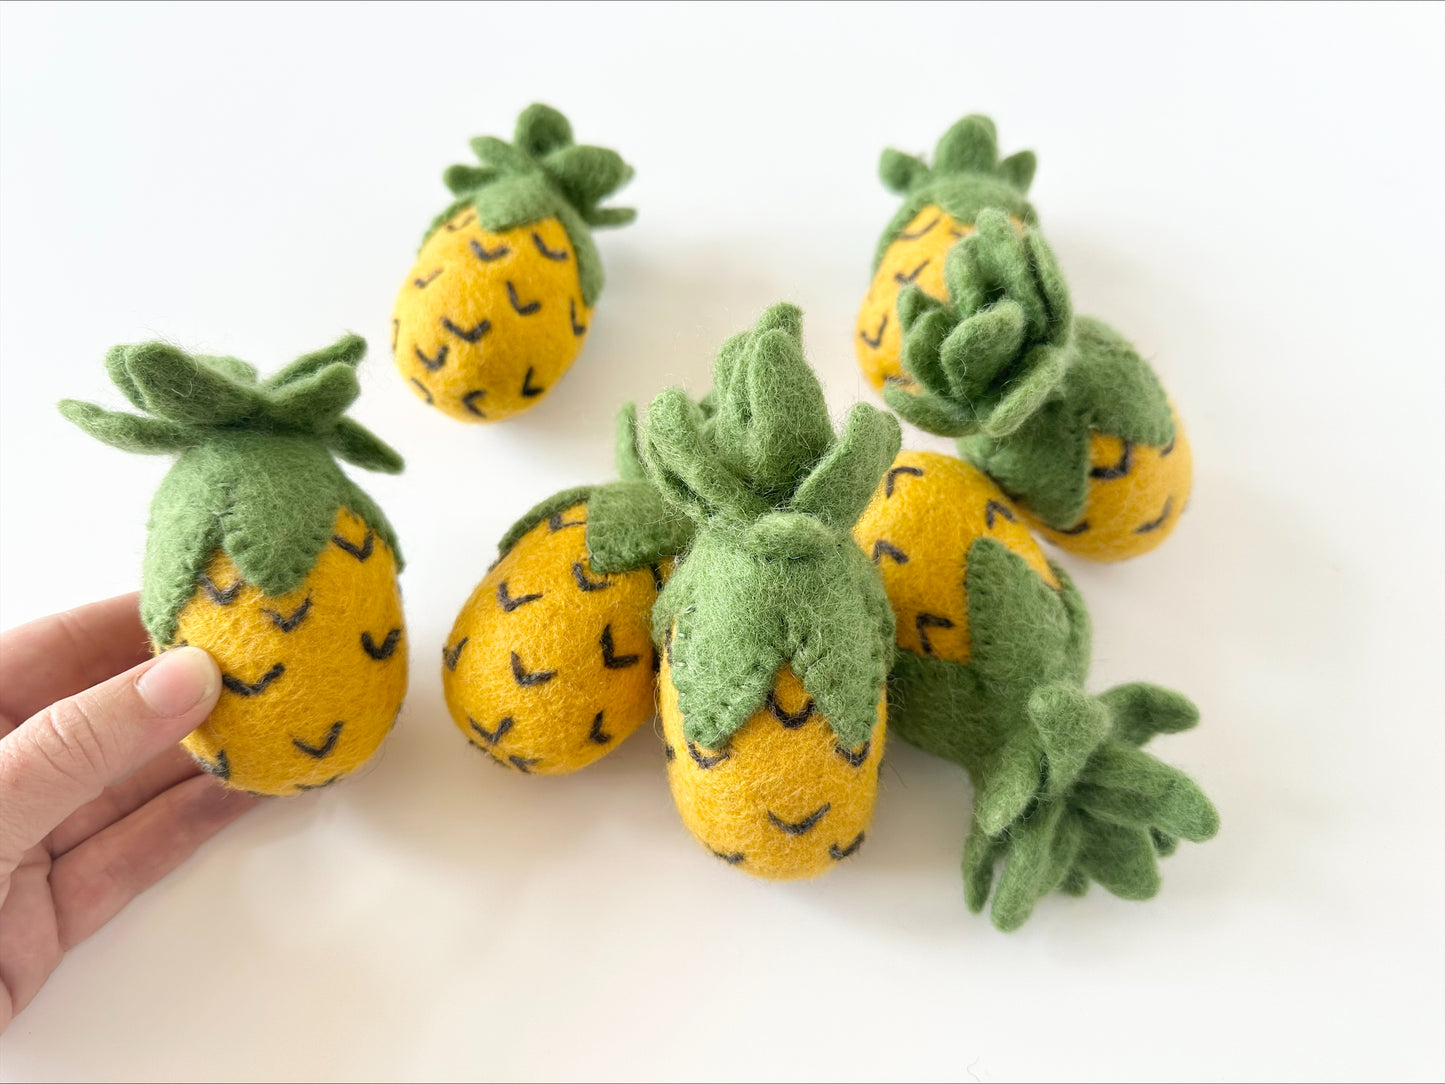 Whole Felted Pineapple